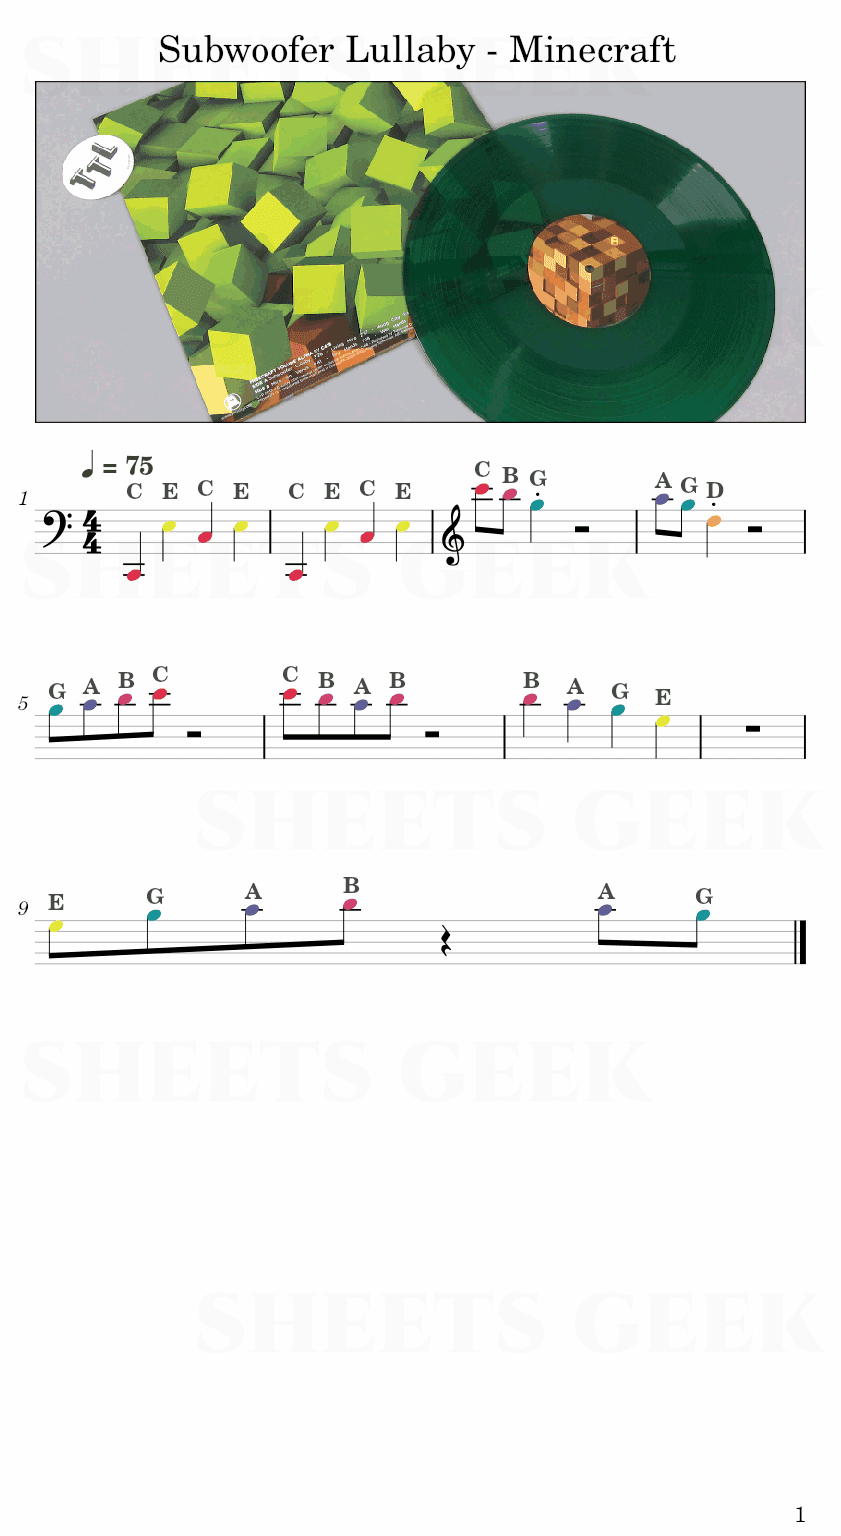 Subwoofer Lullaby - Minecraft Easy Sheet Music Free for piano, keyboard, flute, violin, sax, cello page 1